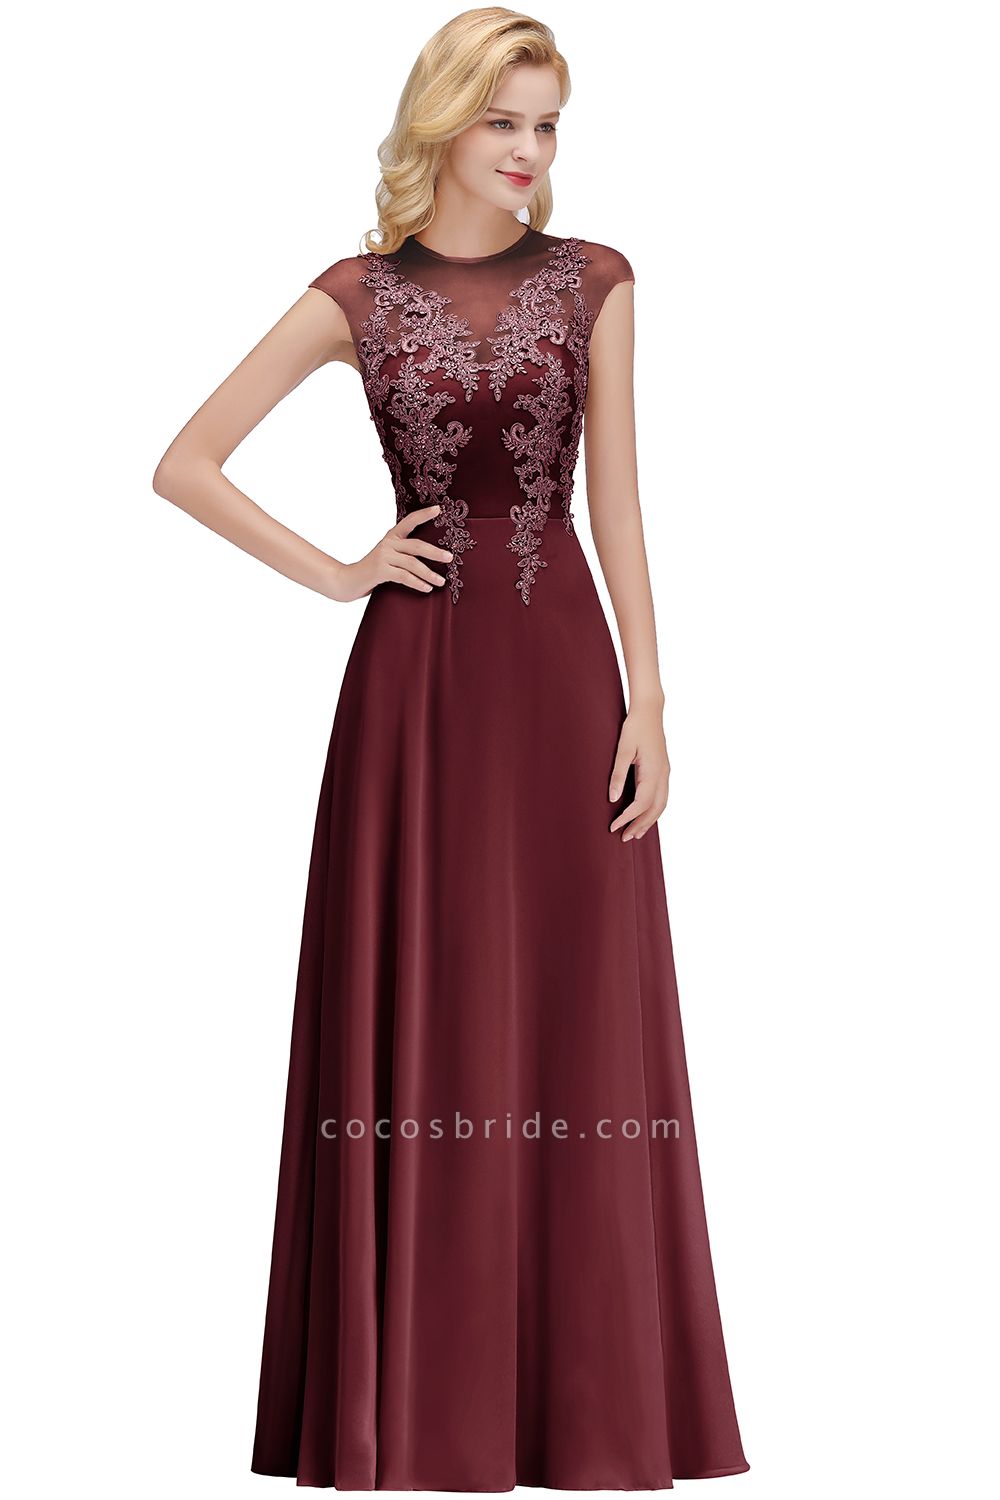 Lace Appliques Beads Cap Sleeve A-line Evening Prom Dress